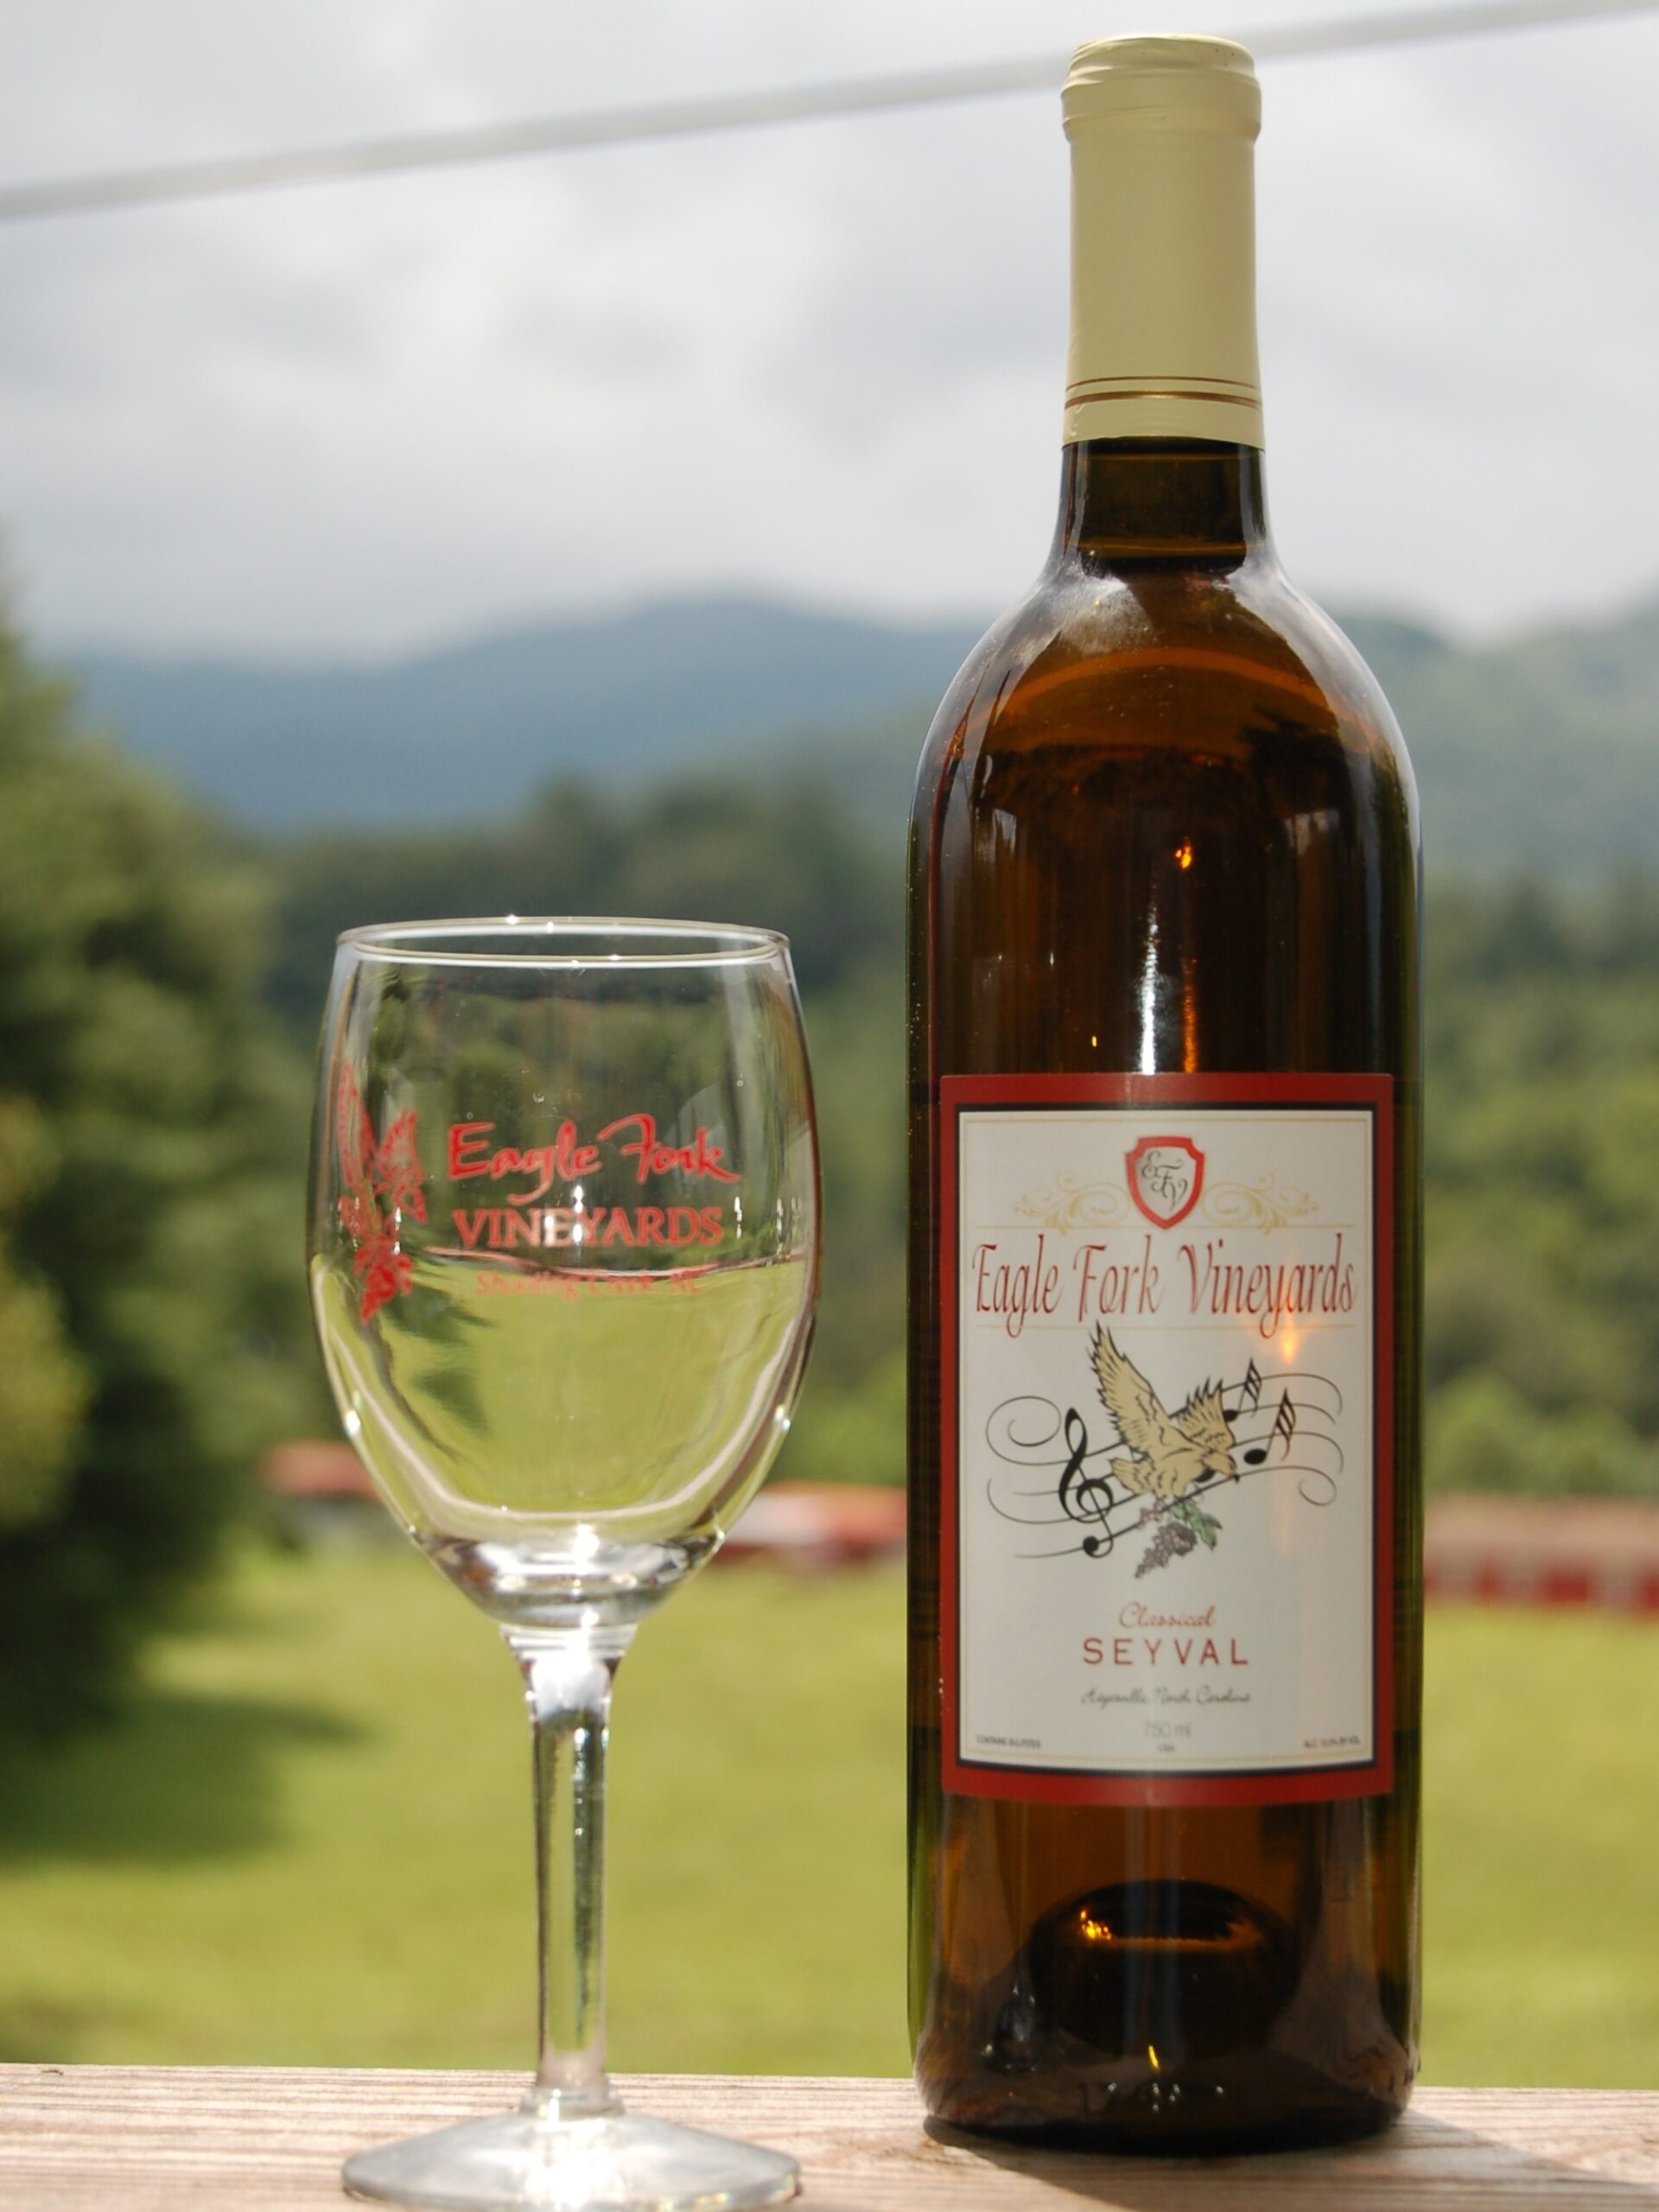 Our Sevyal is medium bodied wine with delightful aromas of apricots, nectarines and citrus. It goes well with tangy cheese, salads, and fish.